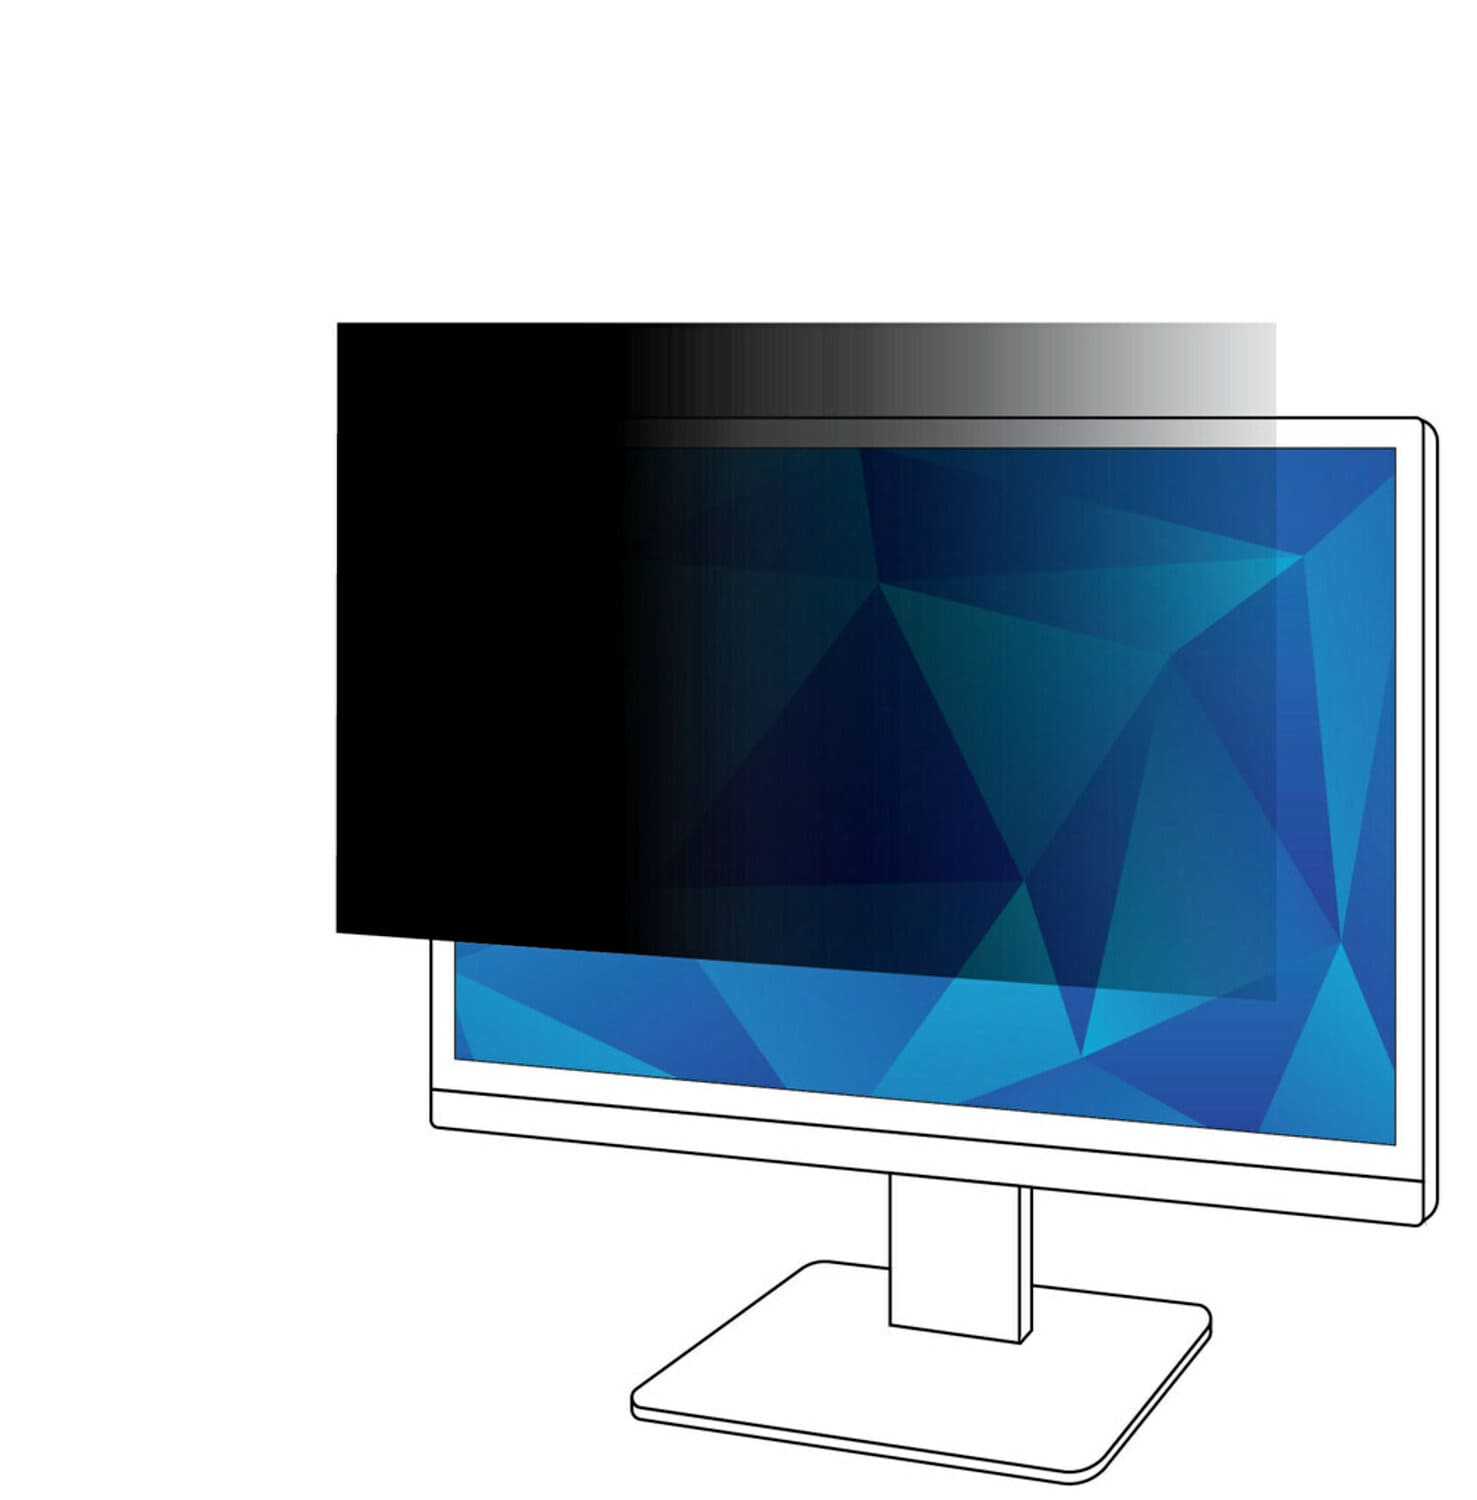 7000031975 - 3M Privacy Filter for 27in Monitor, 16:10, PF270W1B